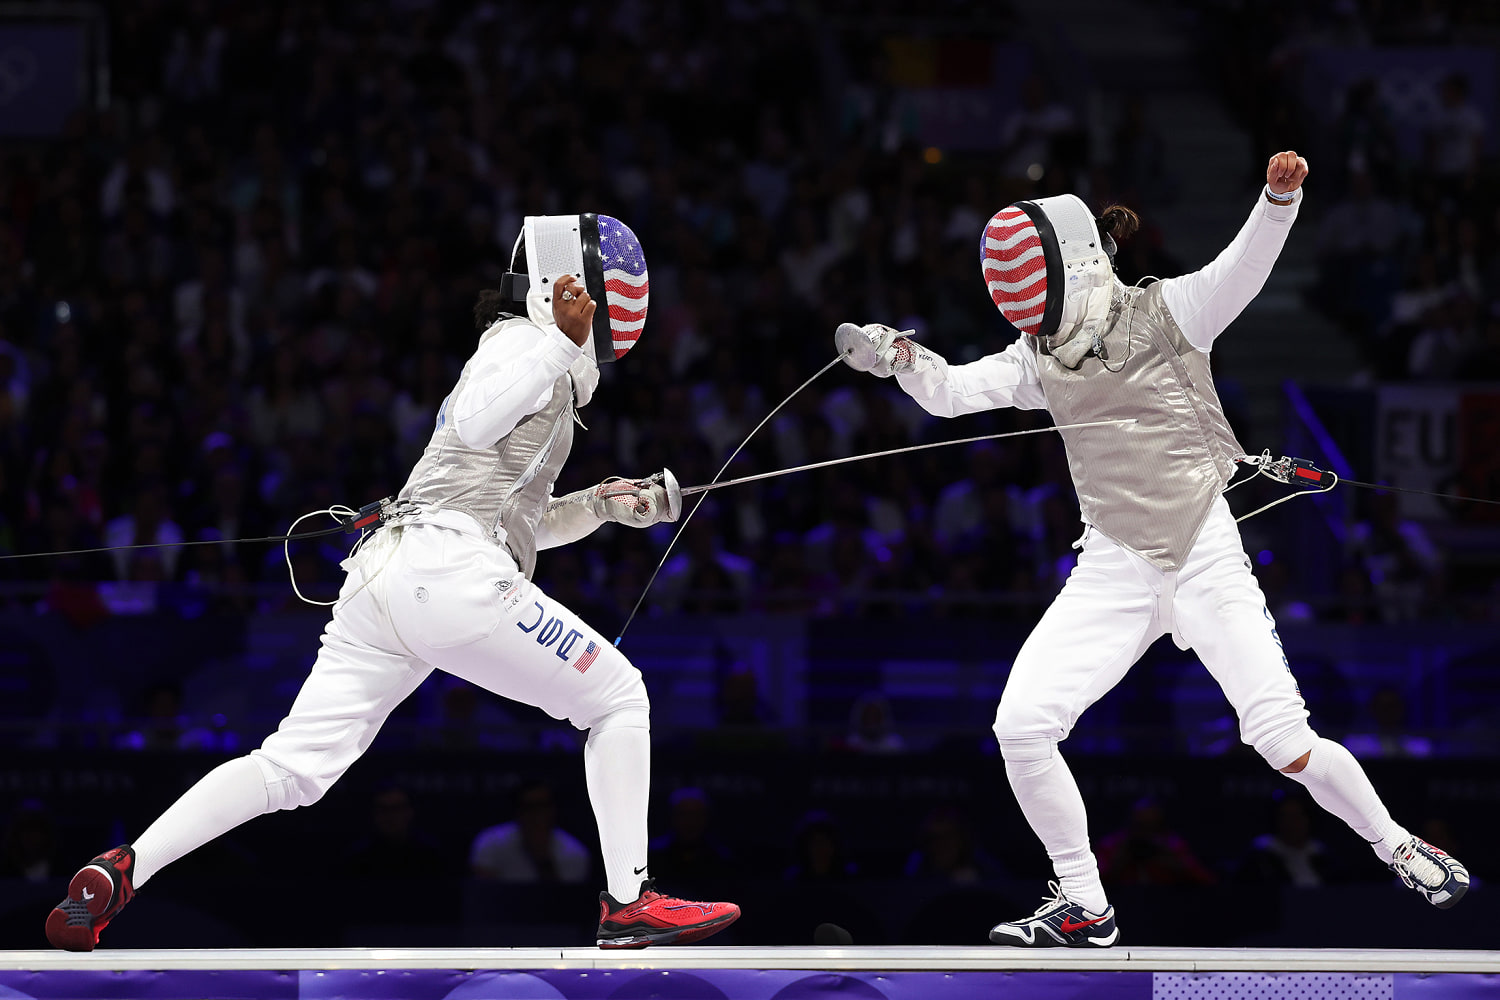 Kiefer and Scruggs take Olympic gold and silver in all-American foil fencing final